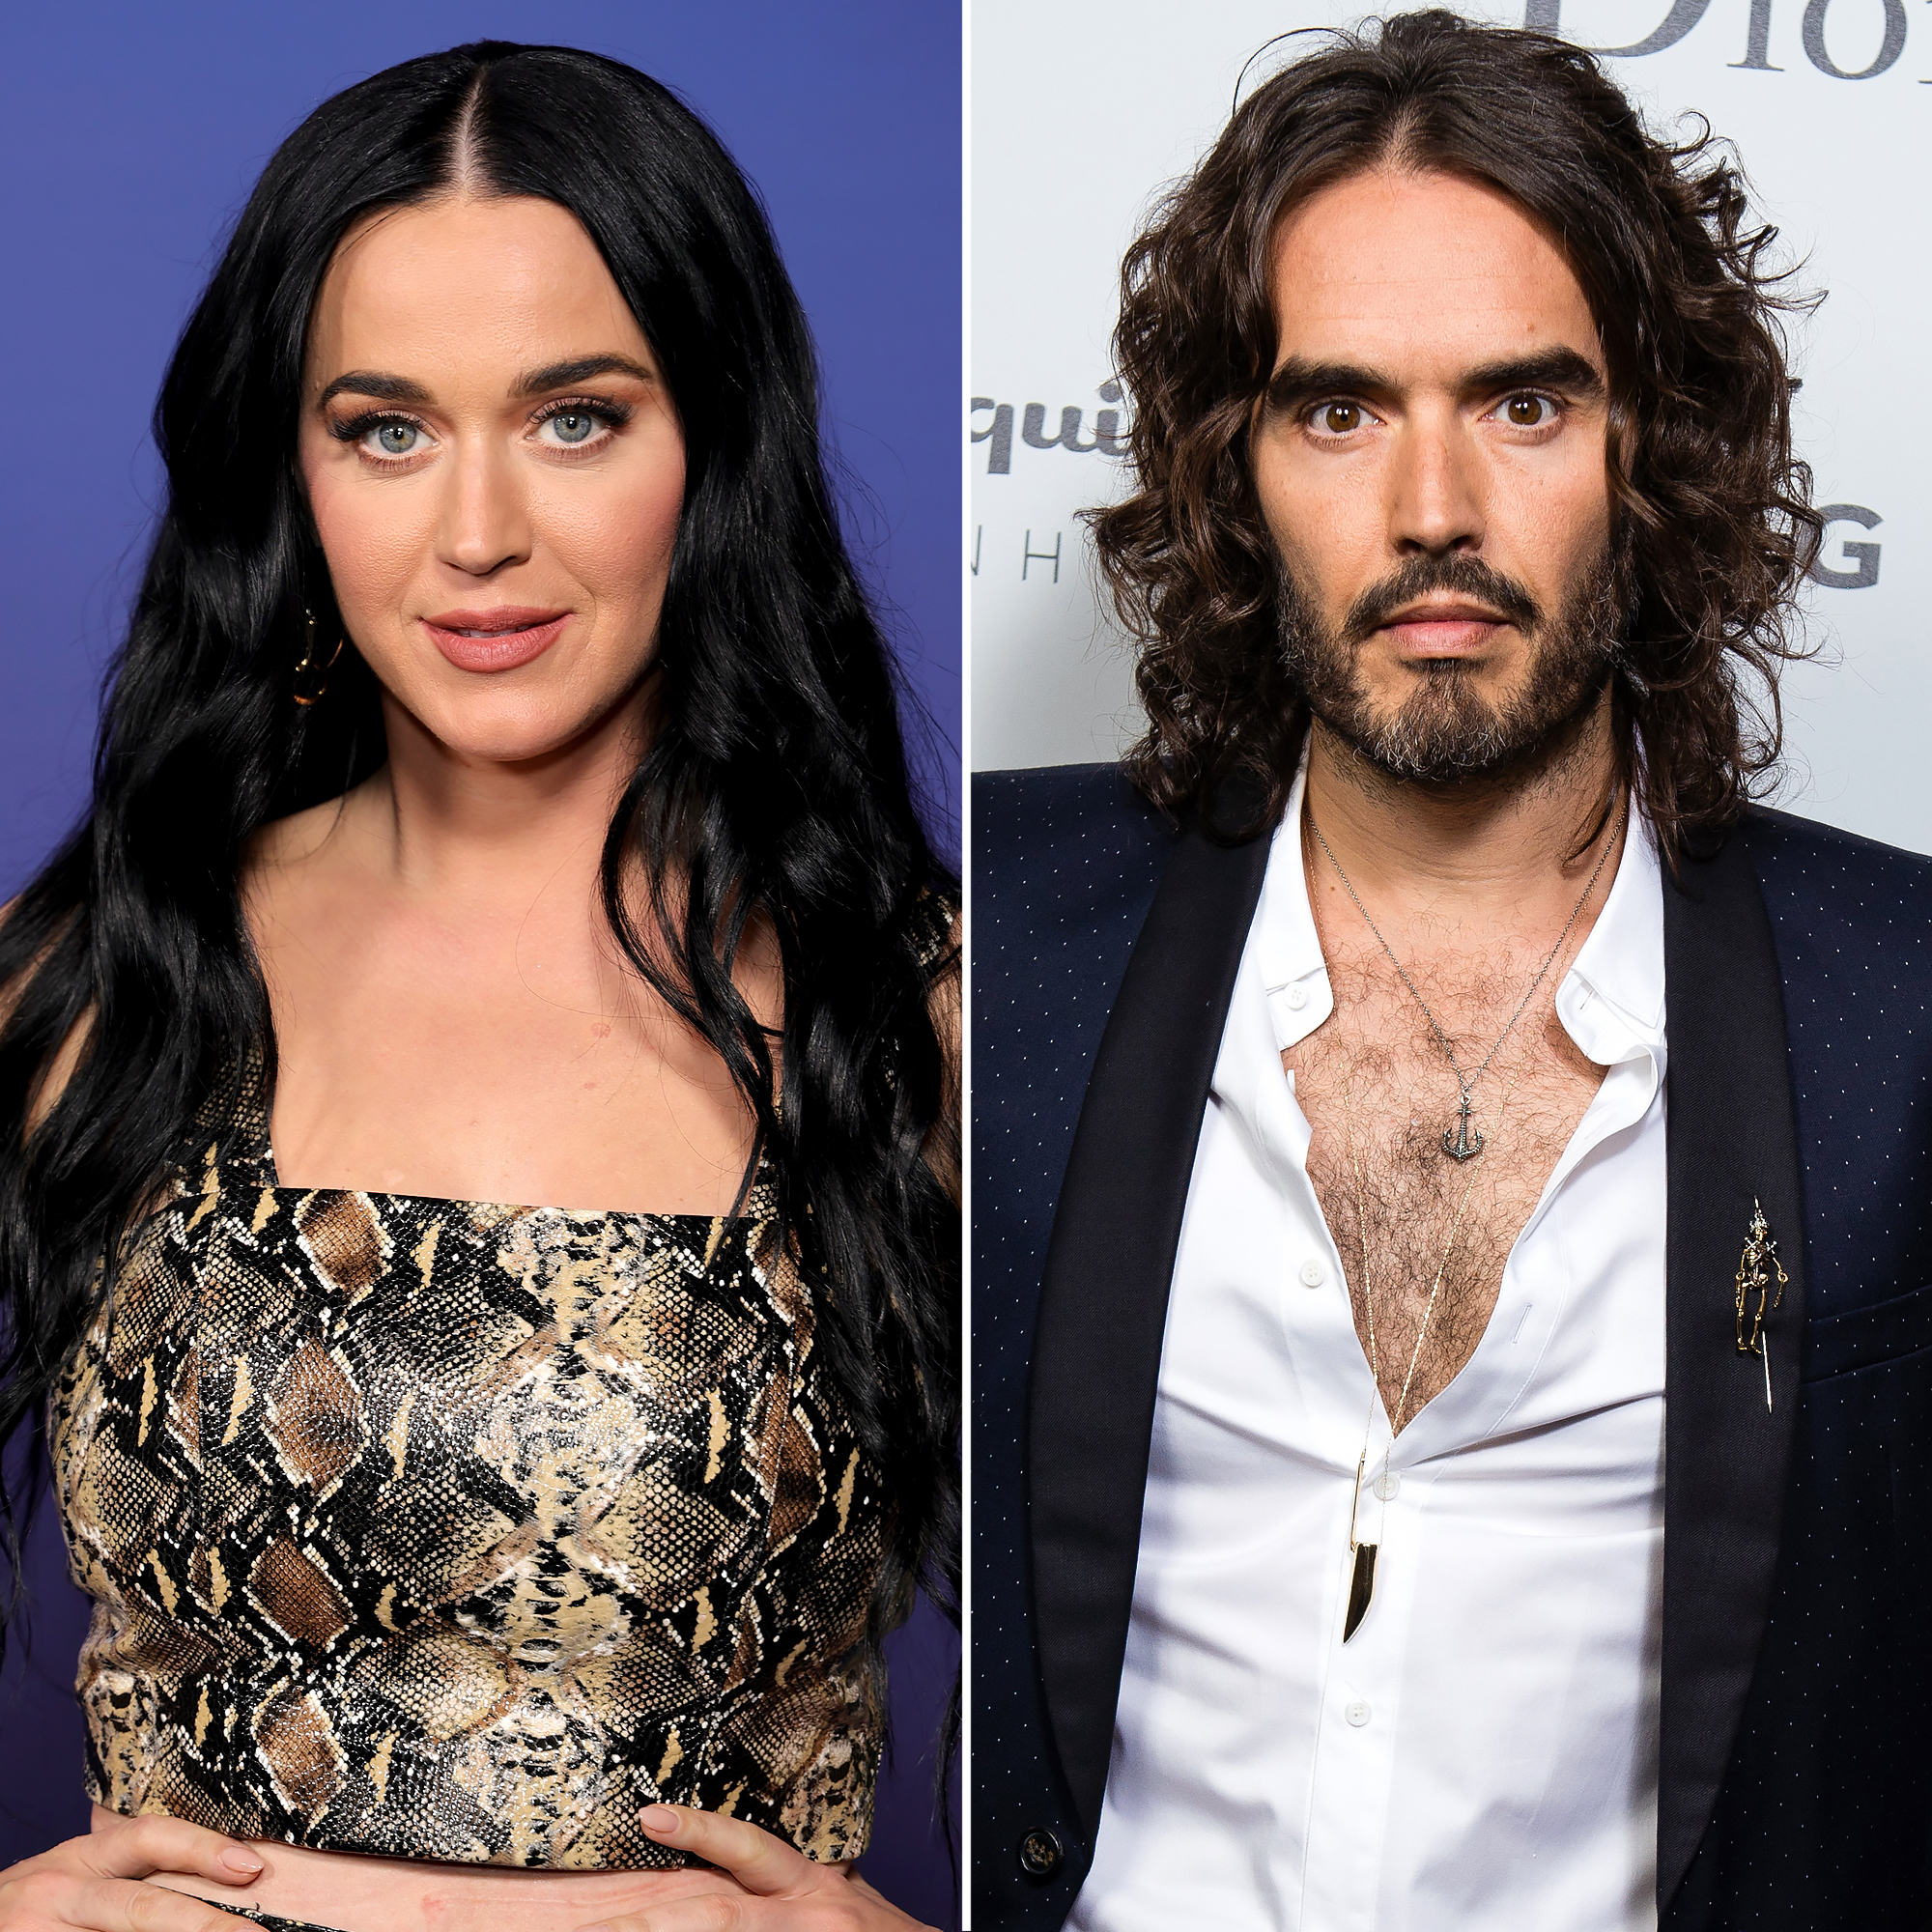 https://www.usmagazine.com/wp-content/uploads/2023/09/Katy-Perry-Hinted-She-Knew-%E2%80%98Real-Truth-About-Ex-Russell-Brand-10-Years-Before-Sexual-Assault-Claims1.jpg?quality=86&strip=all